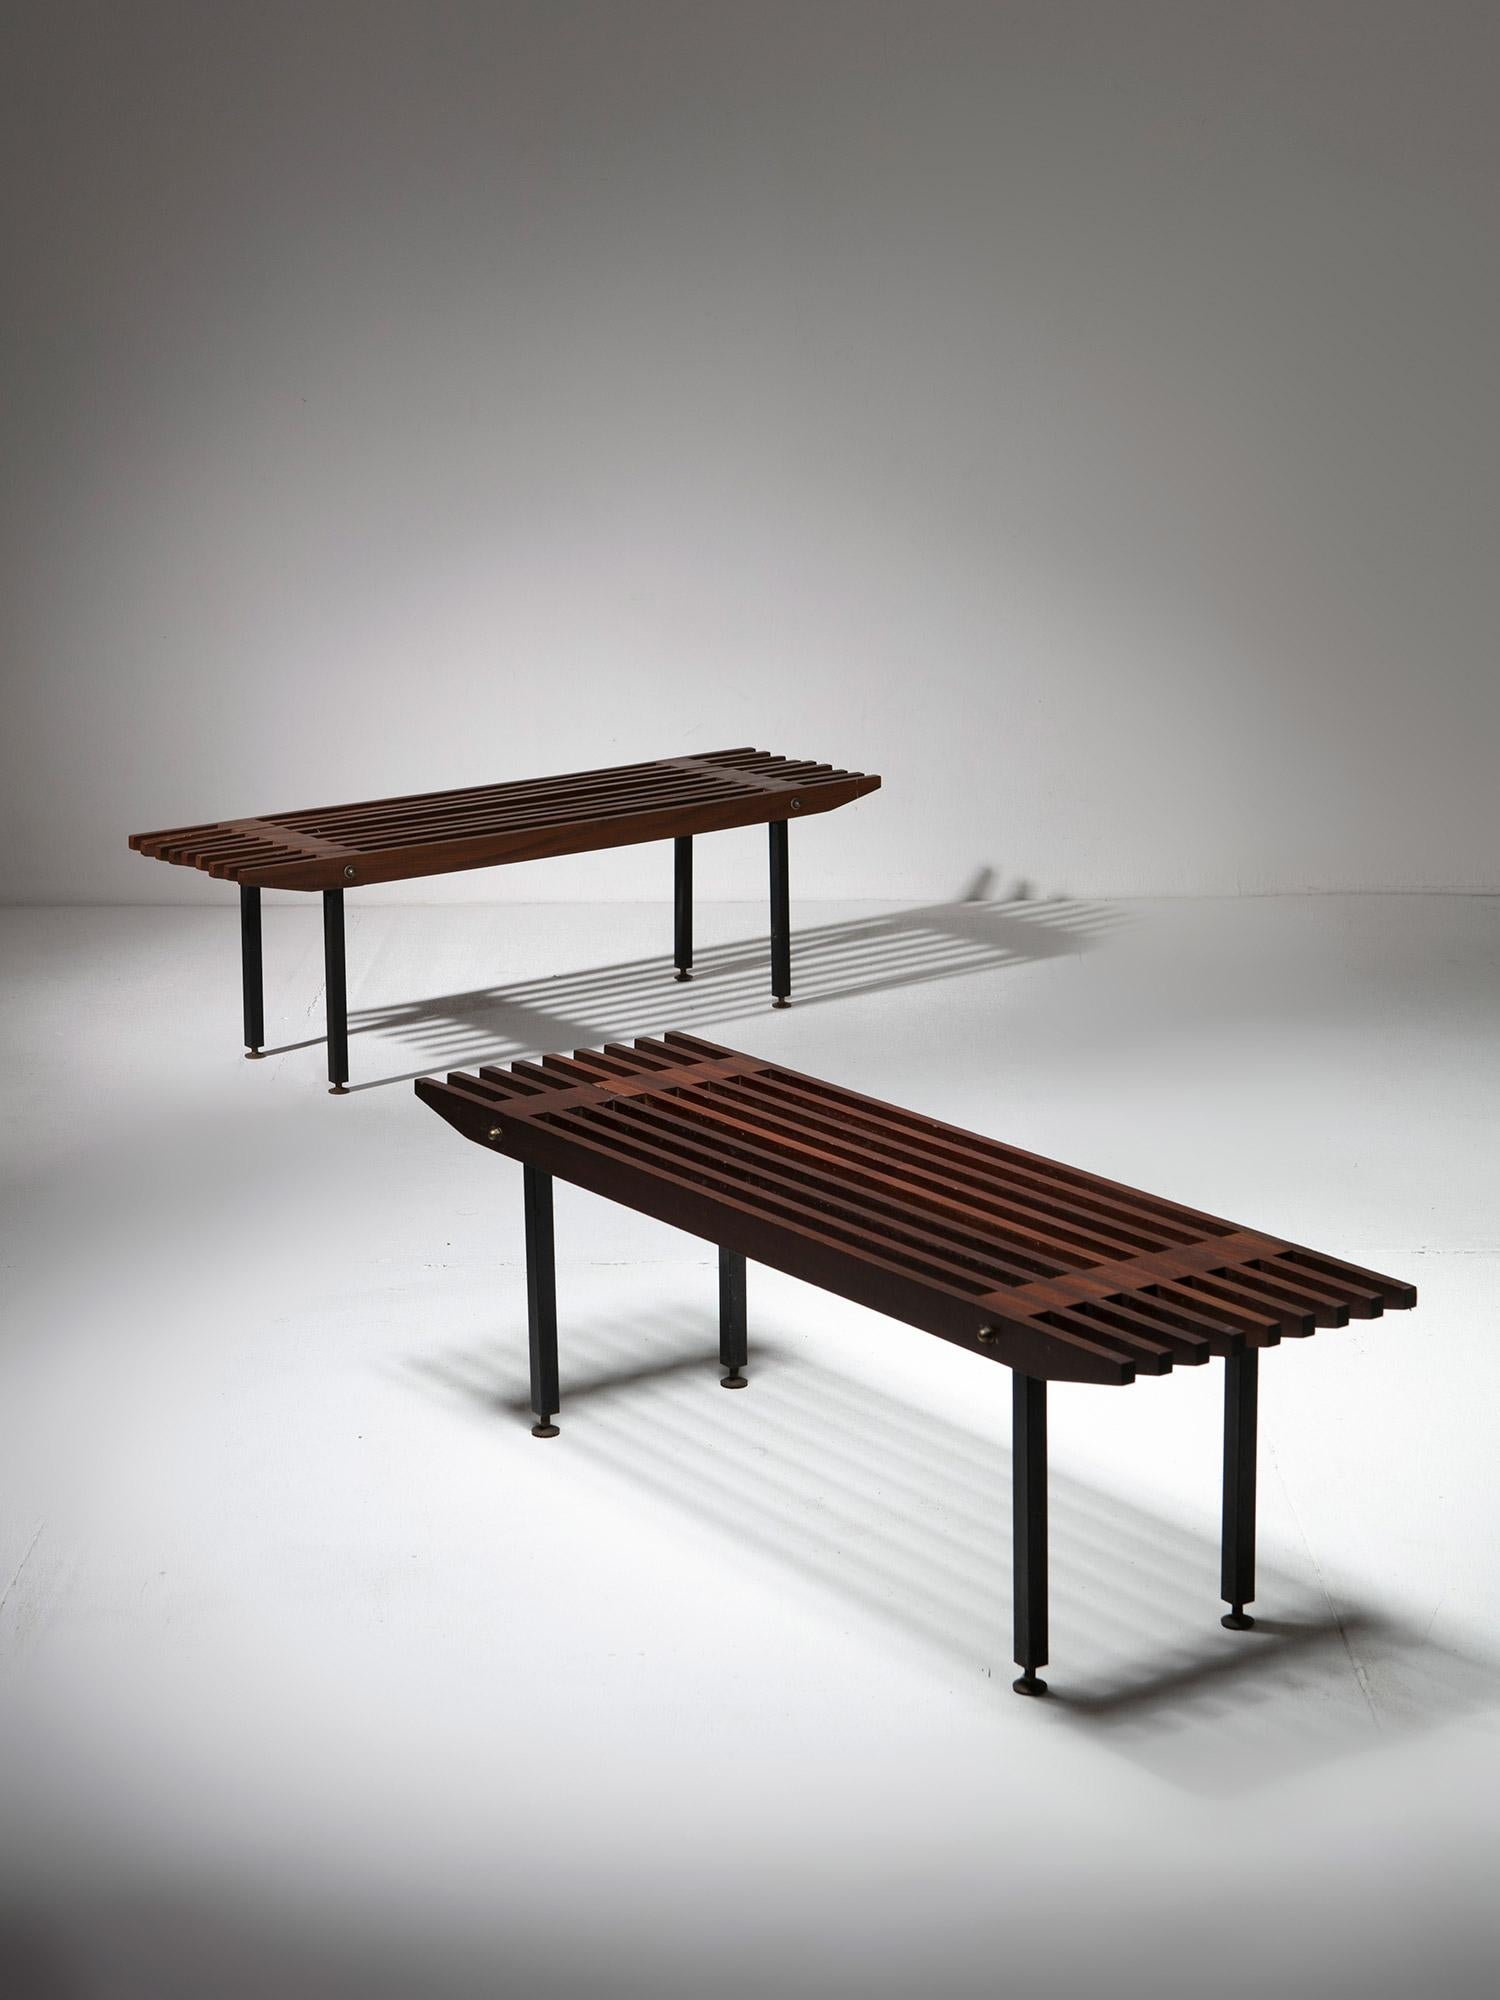 Pair of wood benches attributed to Carlo De Carli for Fiarm.
Solid wood slabs with raked edges, supported by a metal frame with brass connections.